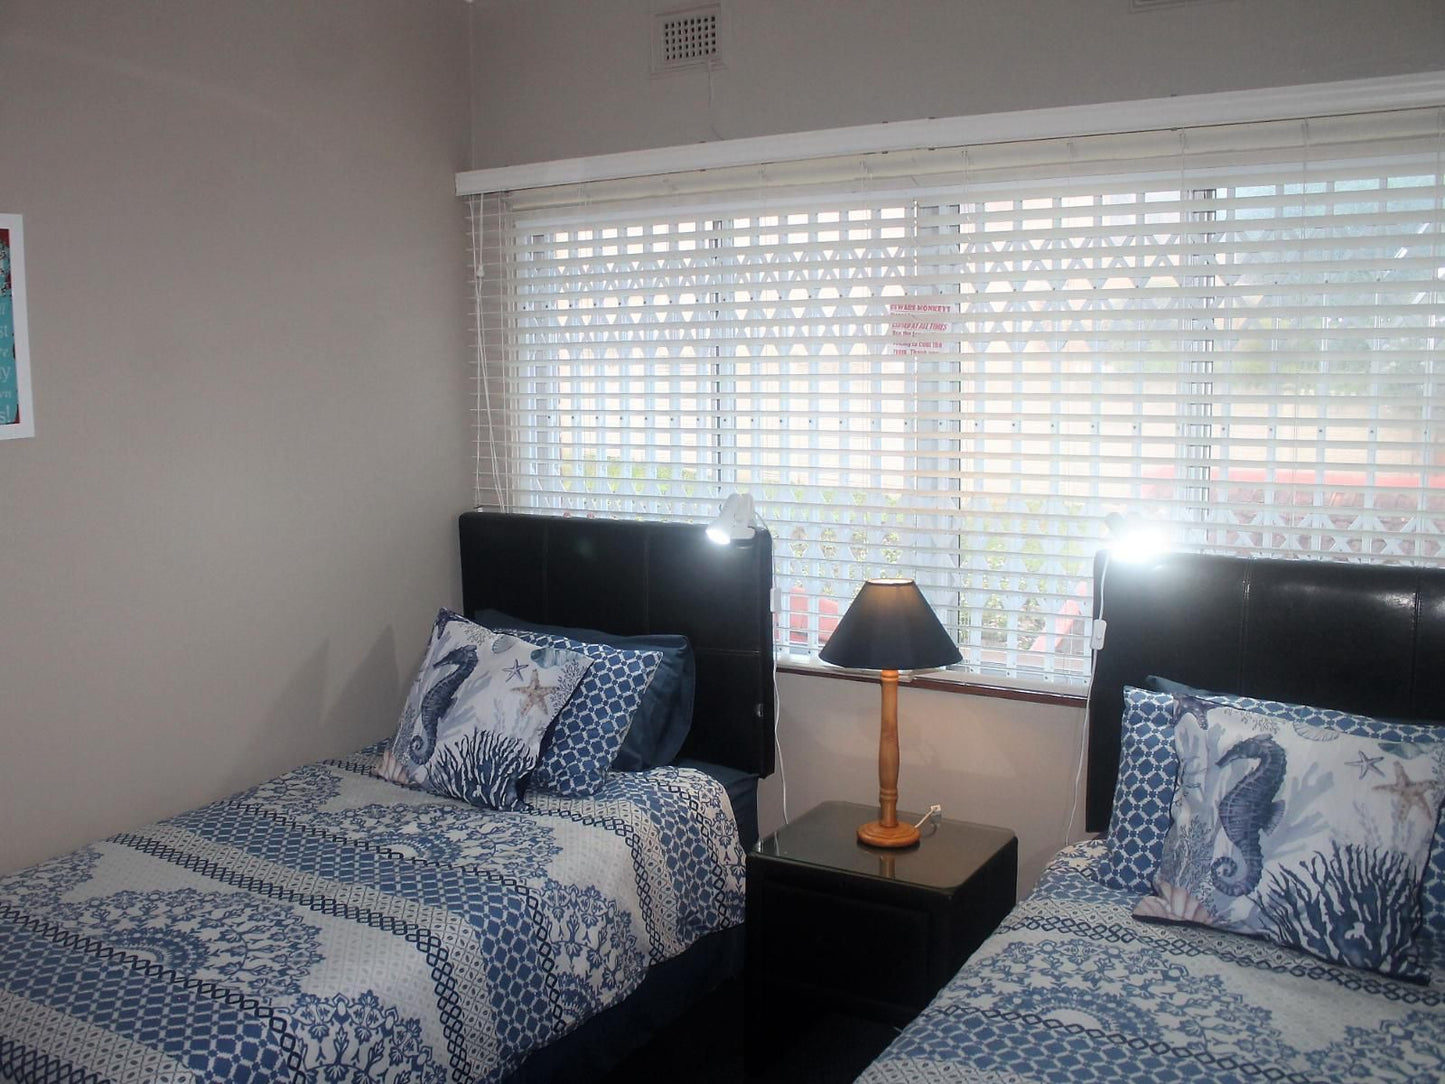 Dolphin View Self Catering Freeland Park Scottburgh Kwazulu Natal South Africa Unsaturated, Bedroom